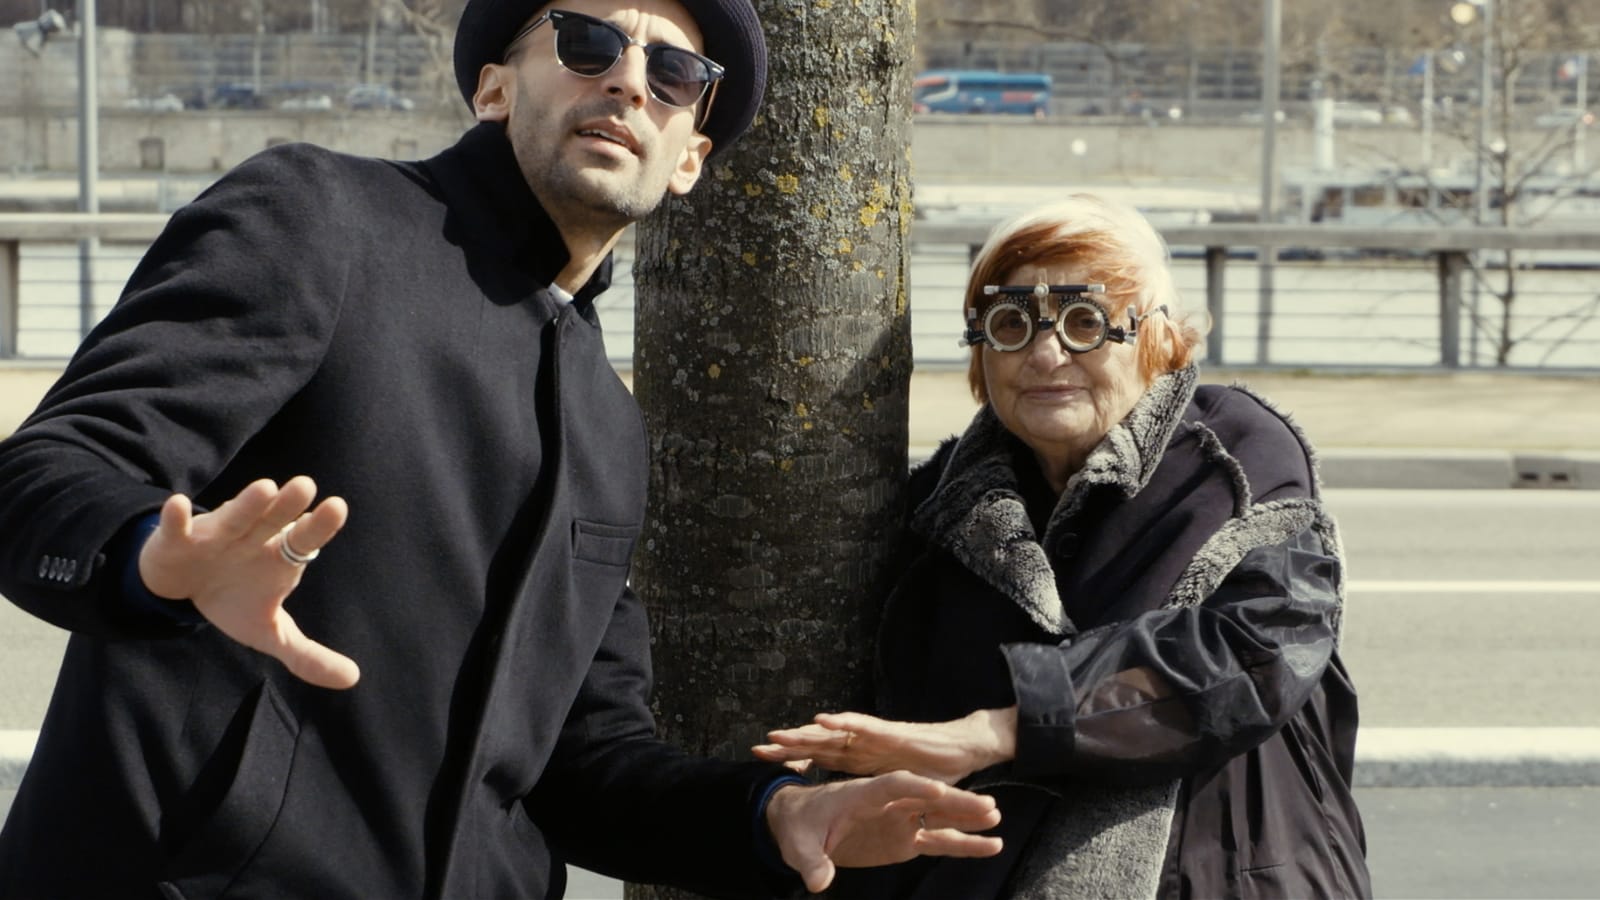 JR (left) stands in dark glasses next to Agnès Varda (right), who is wearing the kind of optical lenses doctors use to assess acuity during routine eye exams.